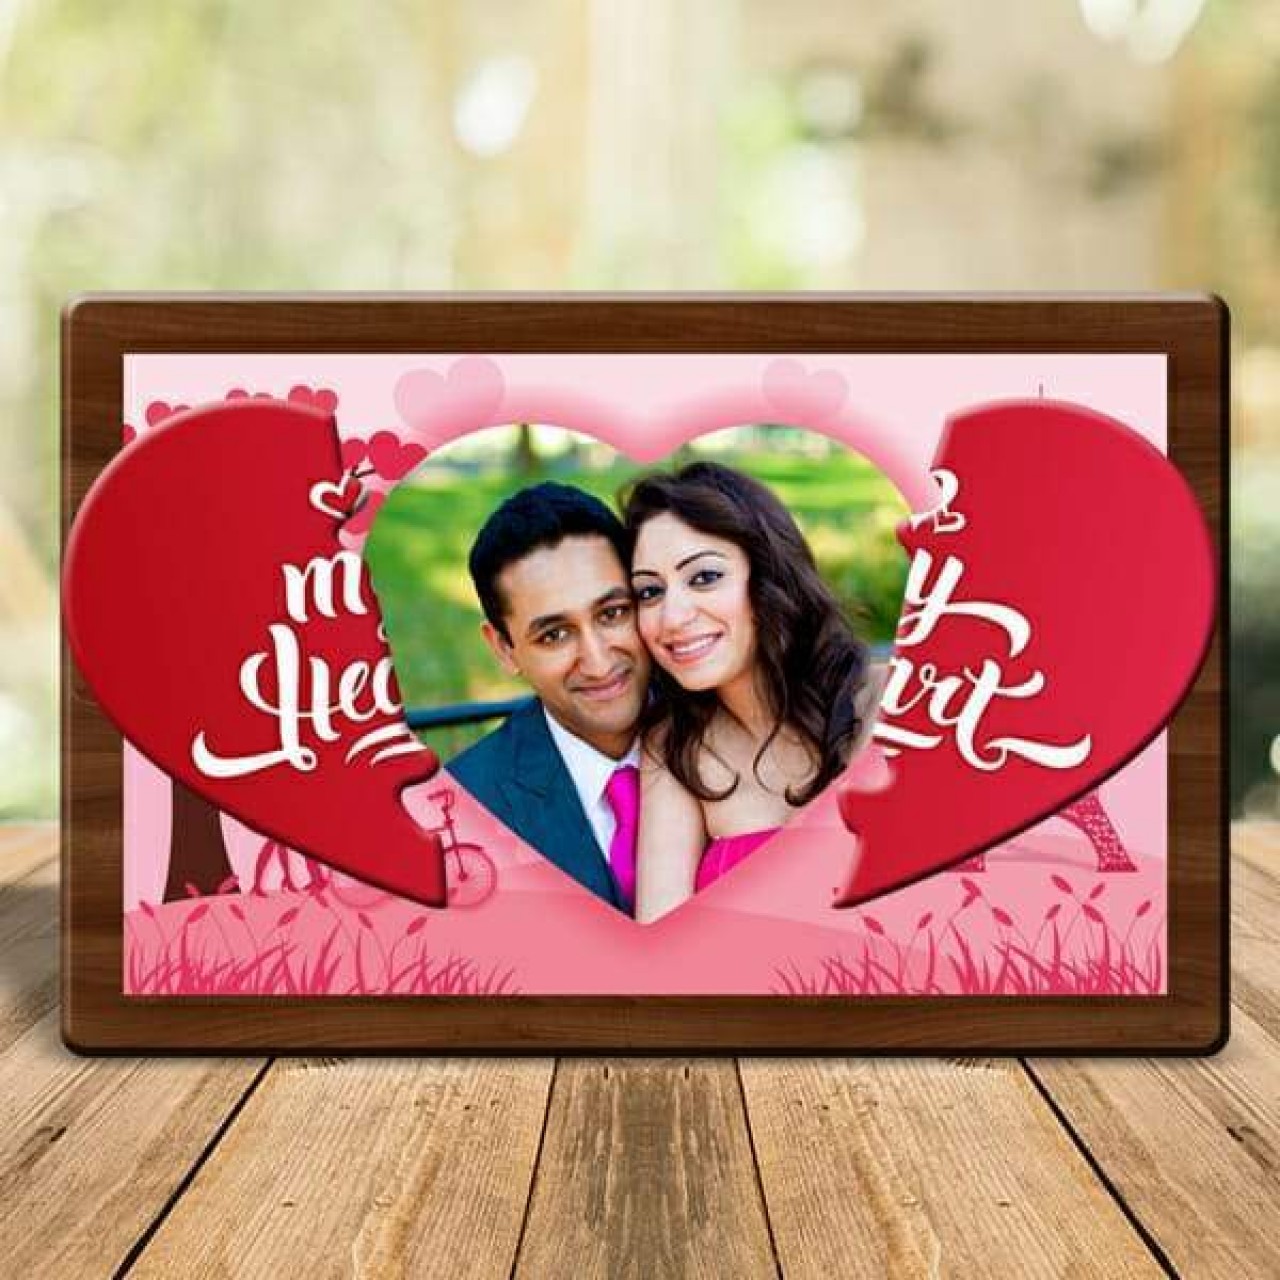 My Heart Magnetic Photo Frame